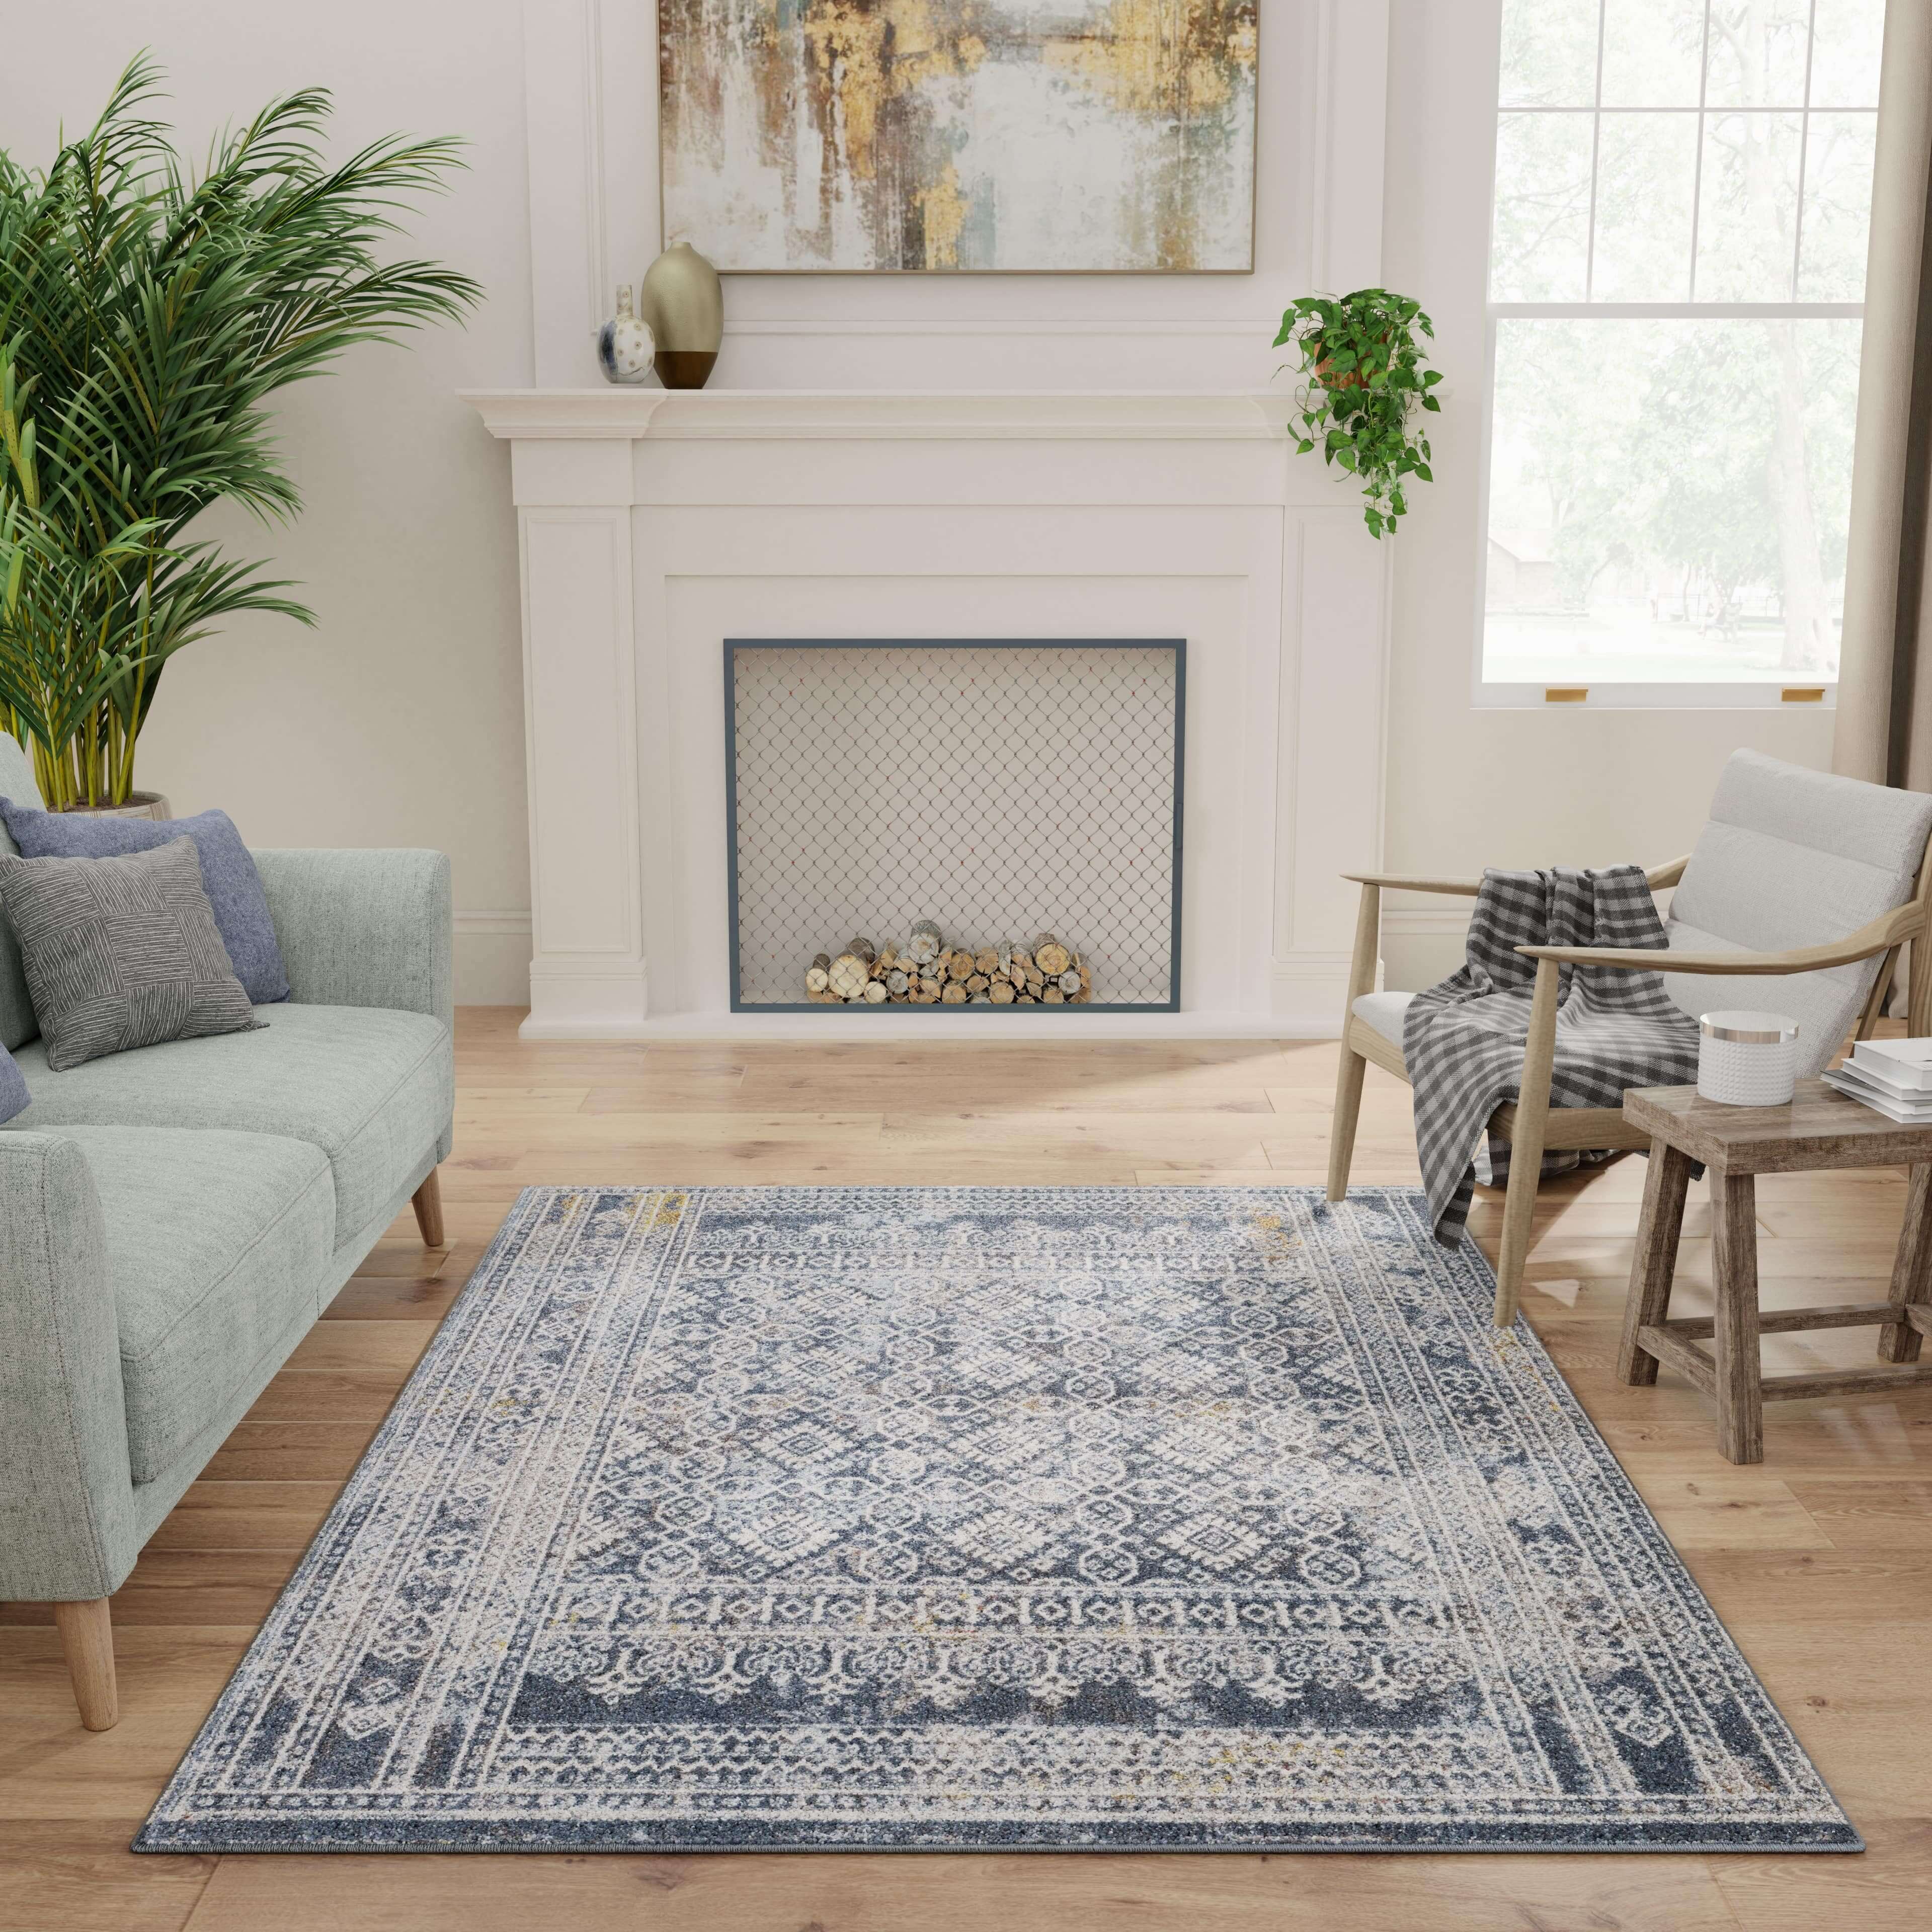 Blue oriental style Natco rug by fireplace on 3D living room template created with imagine.io